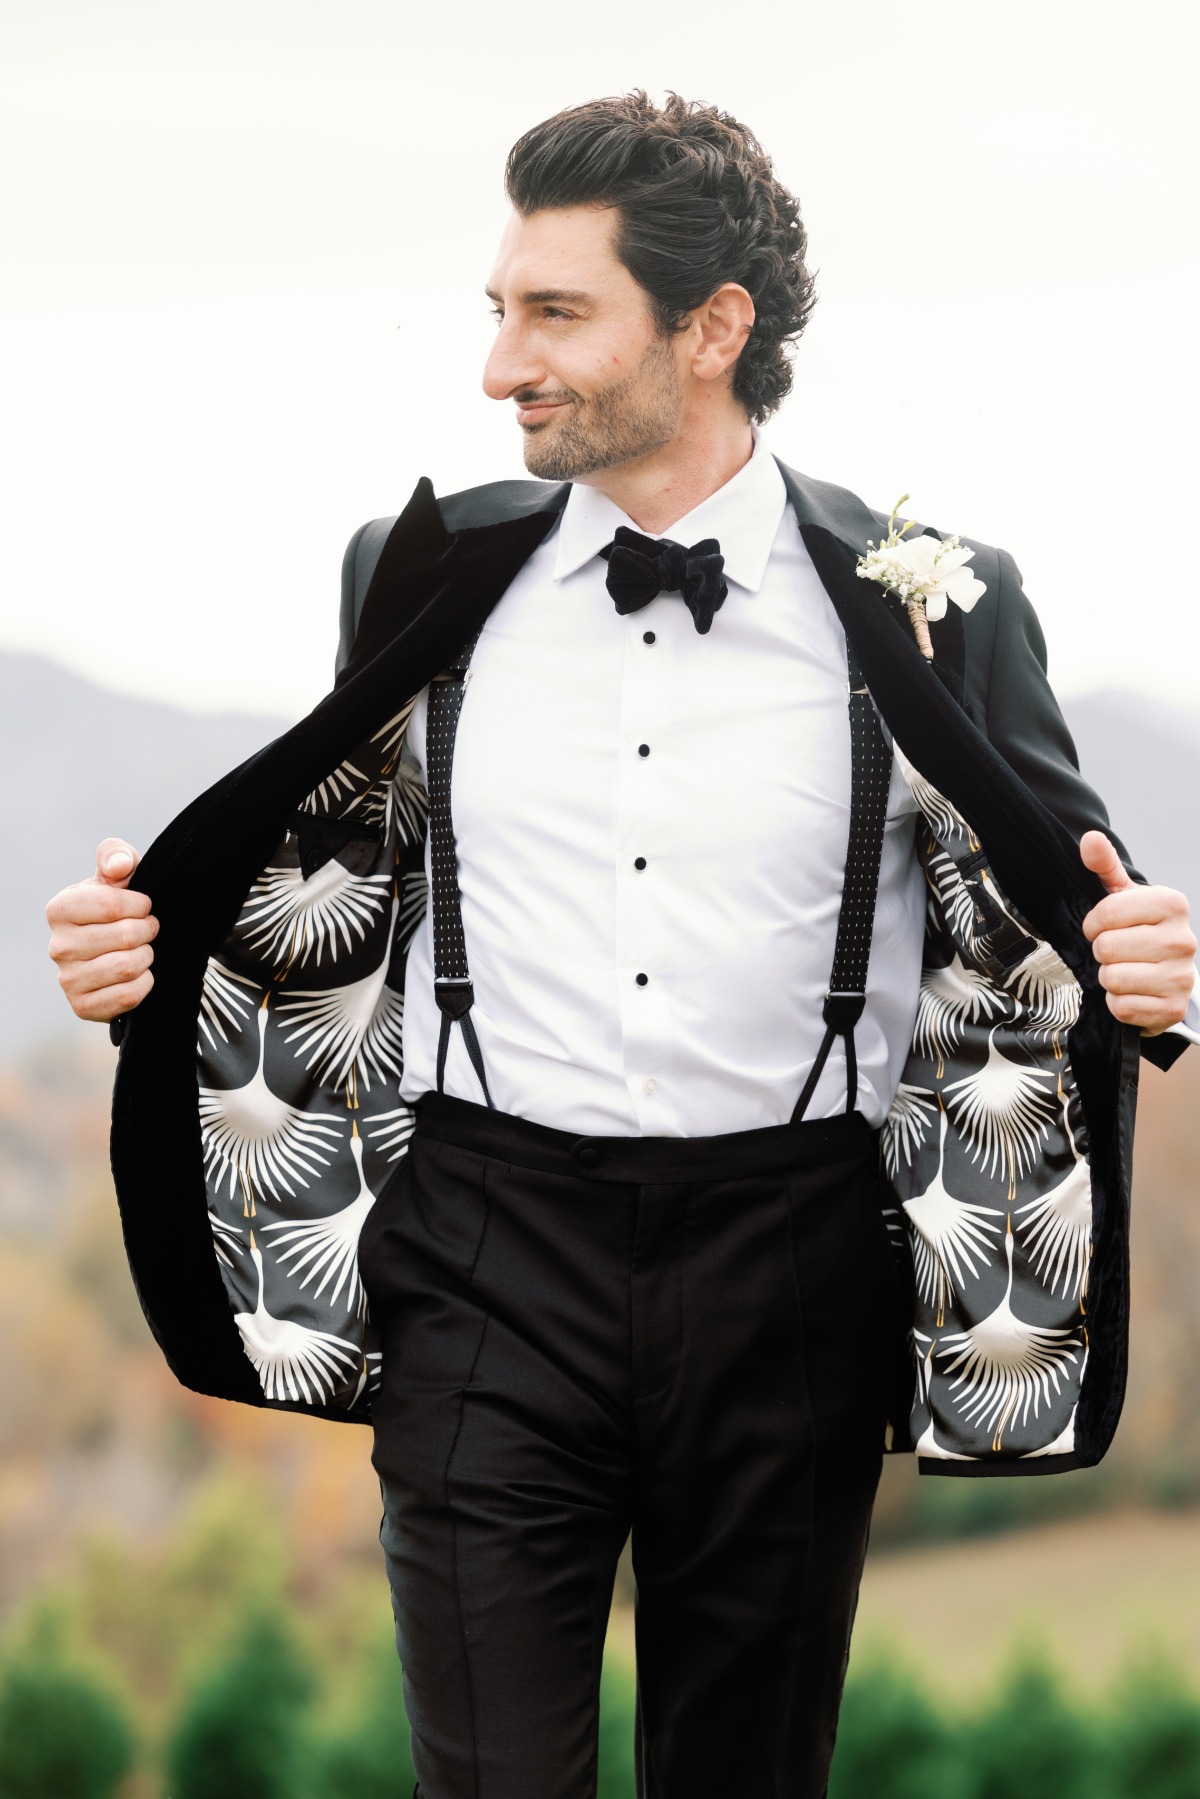 Custom lined groom suit with polkadot suspenders and bow tie